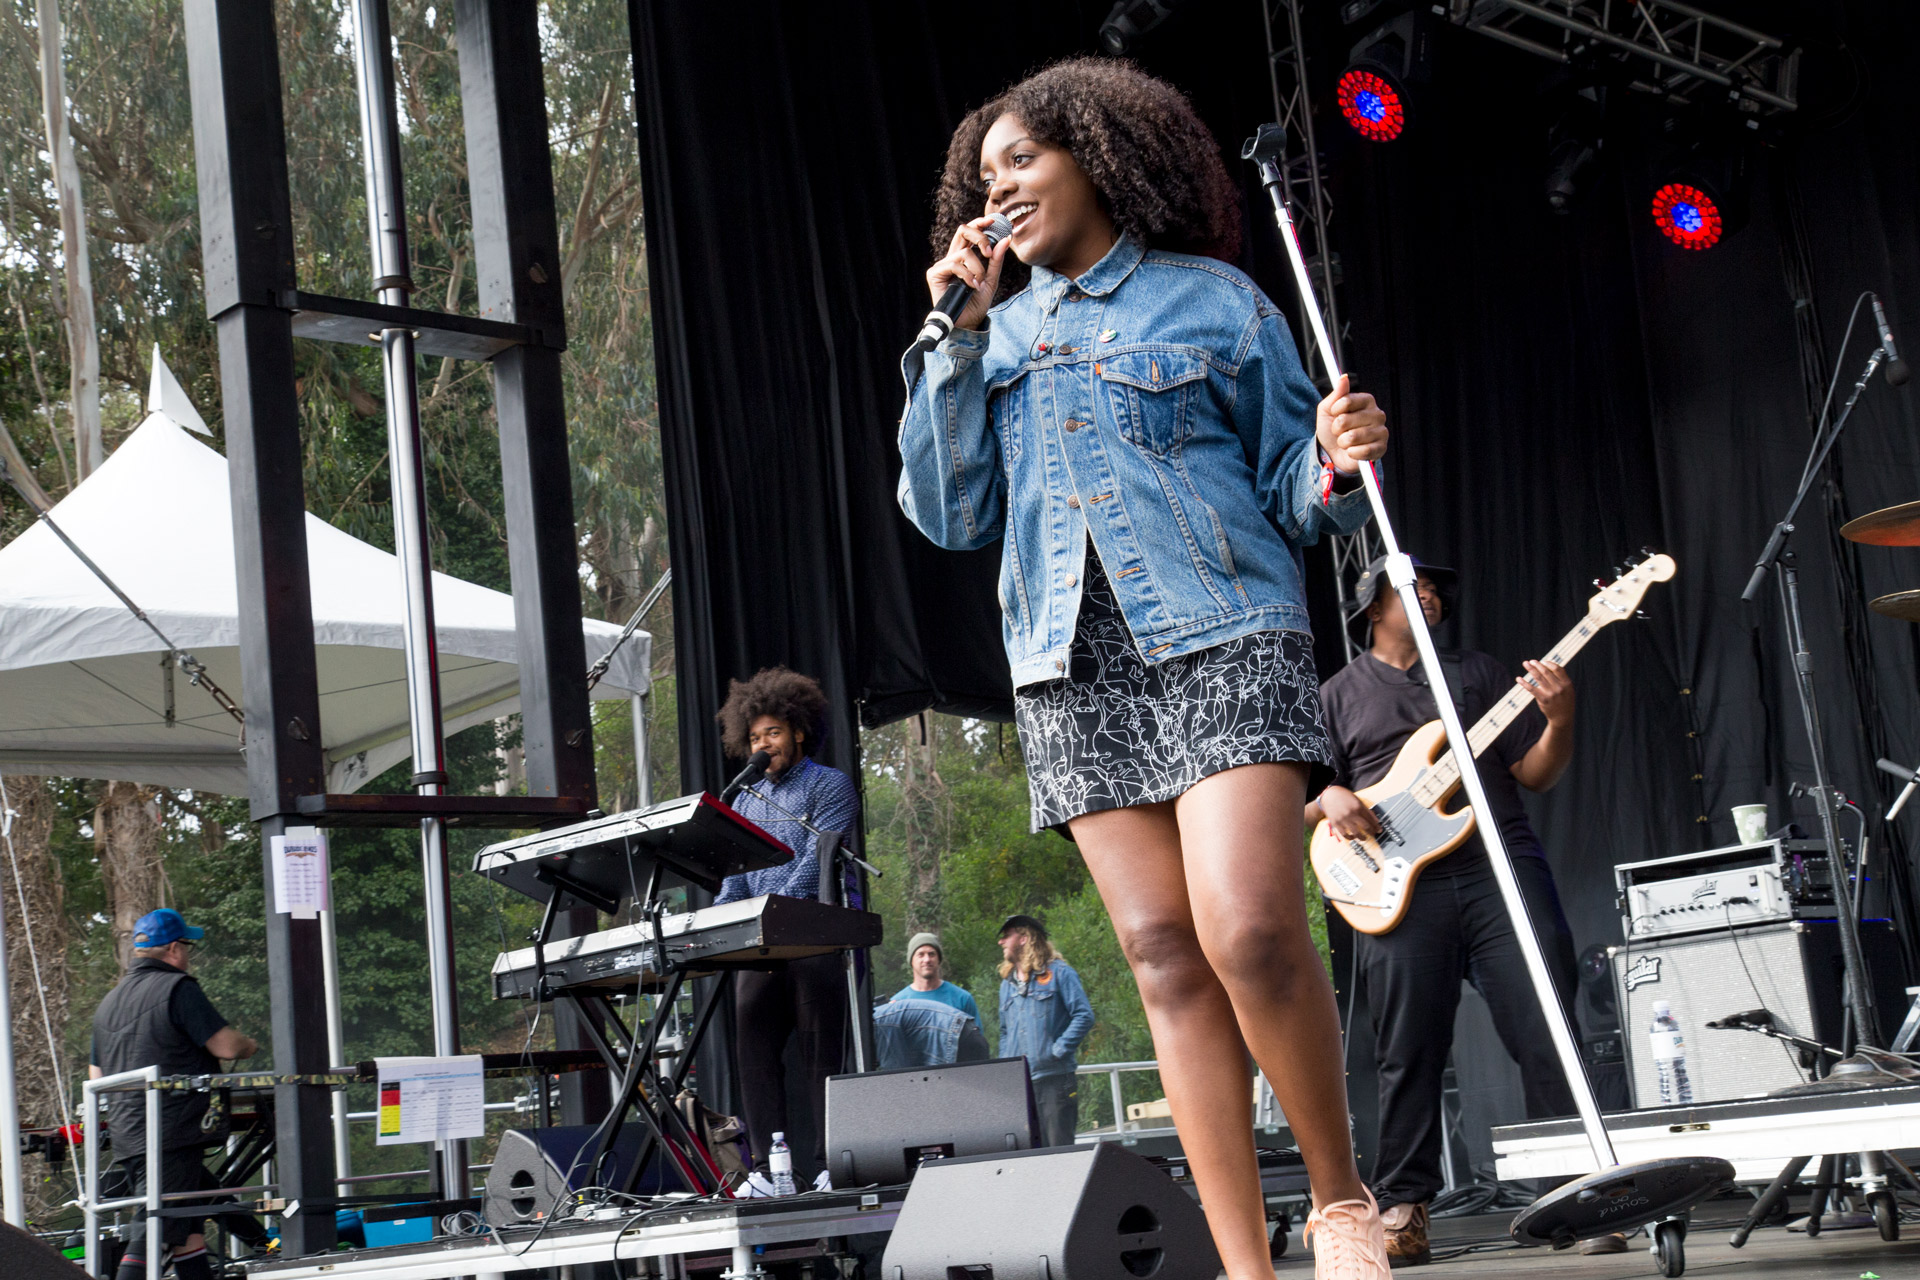 Noname performs at the Outside Lands music festival in San Francisco, Aug. 11, 2017.